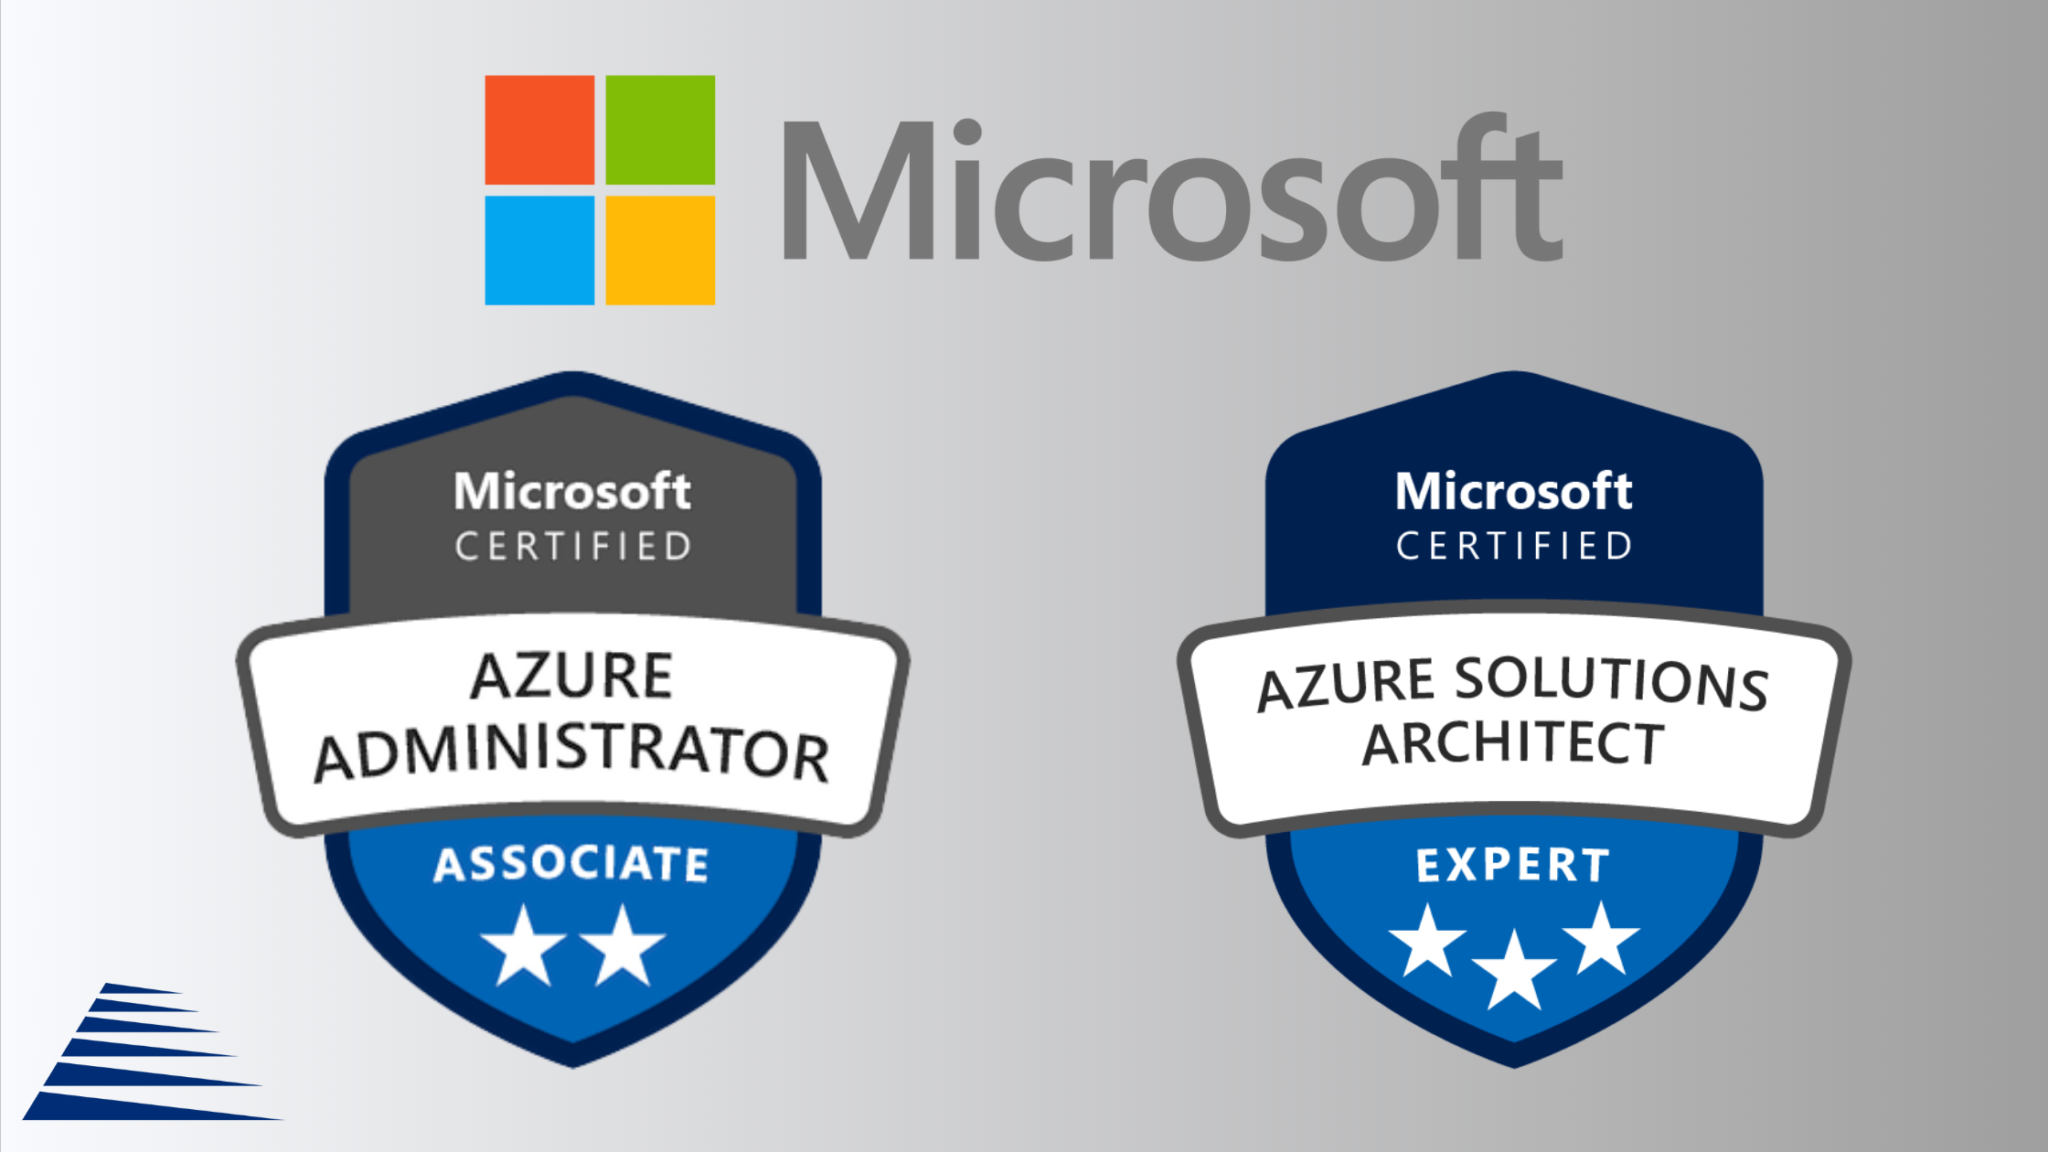 Microsoft IT Certification, Azure Administrator Associate Certification and Azure Solutions Architect Expert certification logo